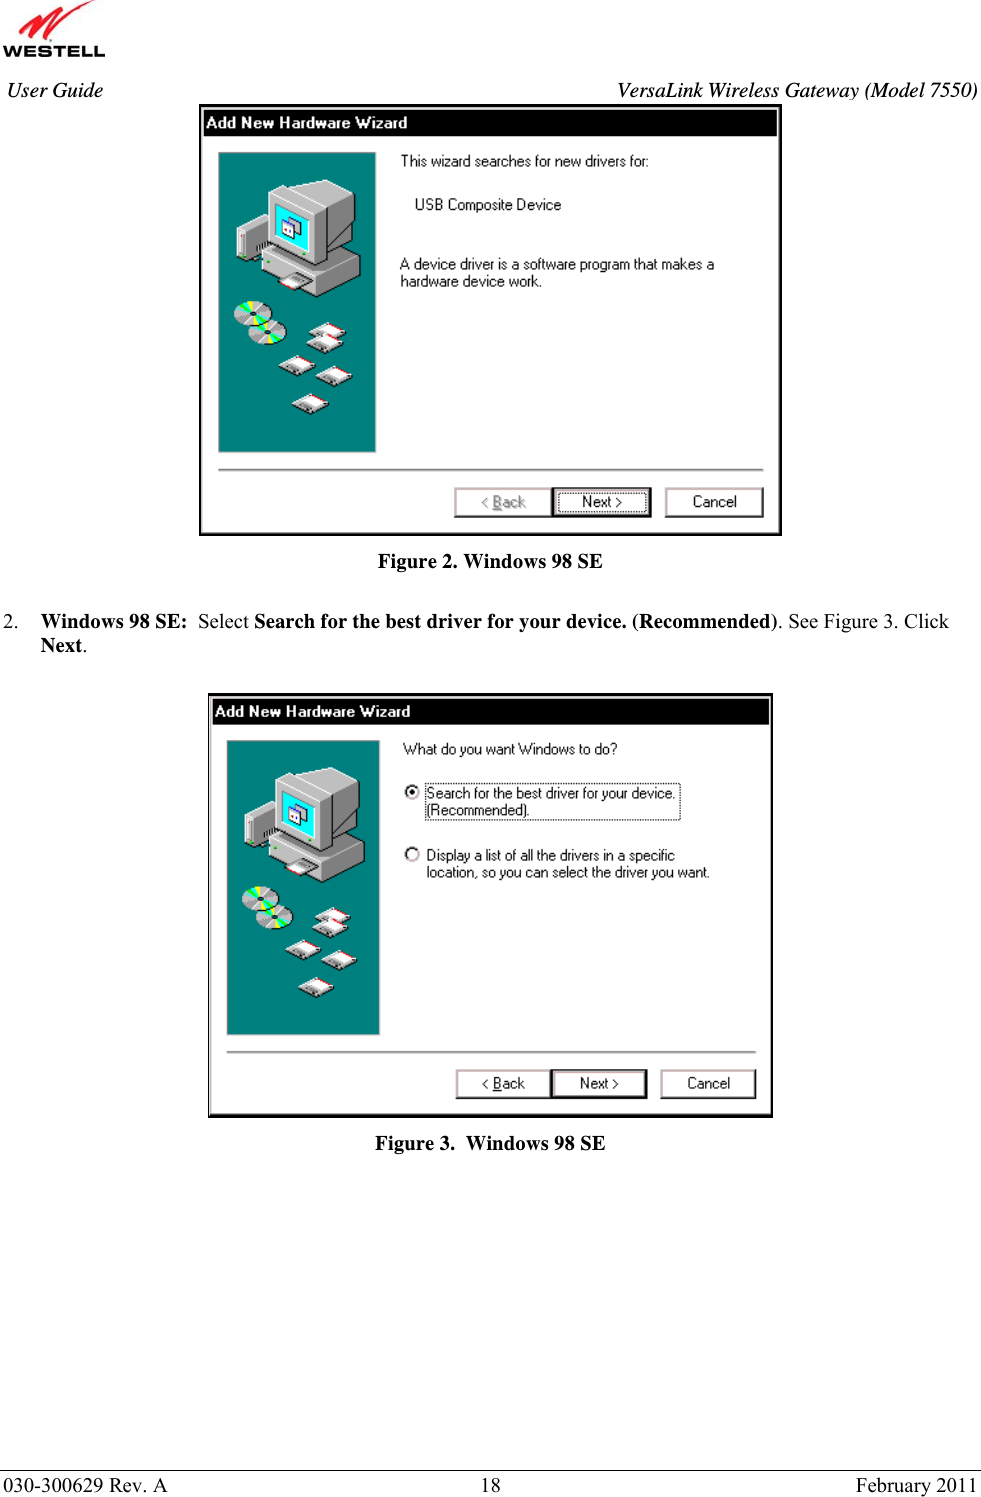       030-300629 Rev. A  18       February 2011 User Guide  VersaLink Wireless Gateway (Model 7550) Figure 2. Windows 98 SE  2. Windows 98 SE:  Select Search for the best driver for your device. (Recommended). See Figure 3. Click Next.     Figure 3.  Windows 98 SE            